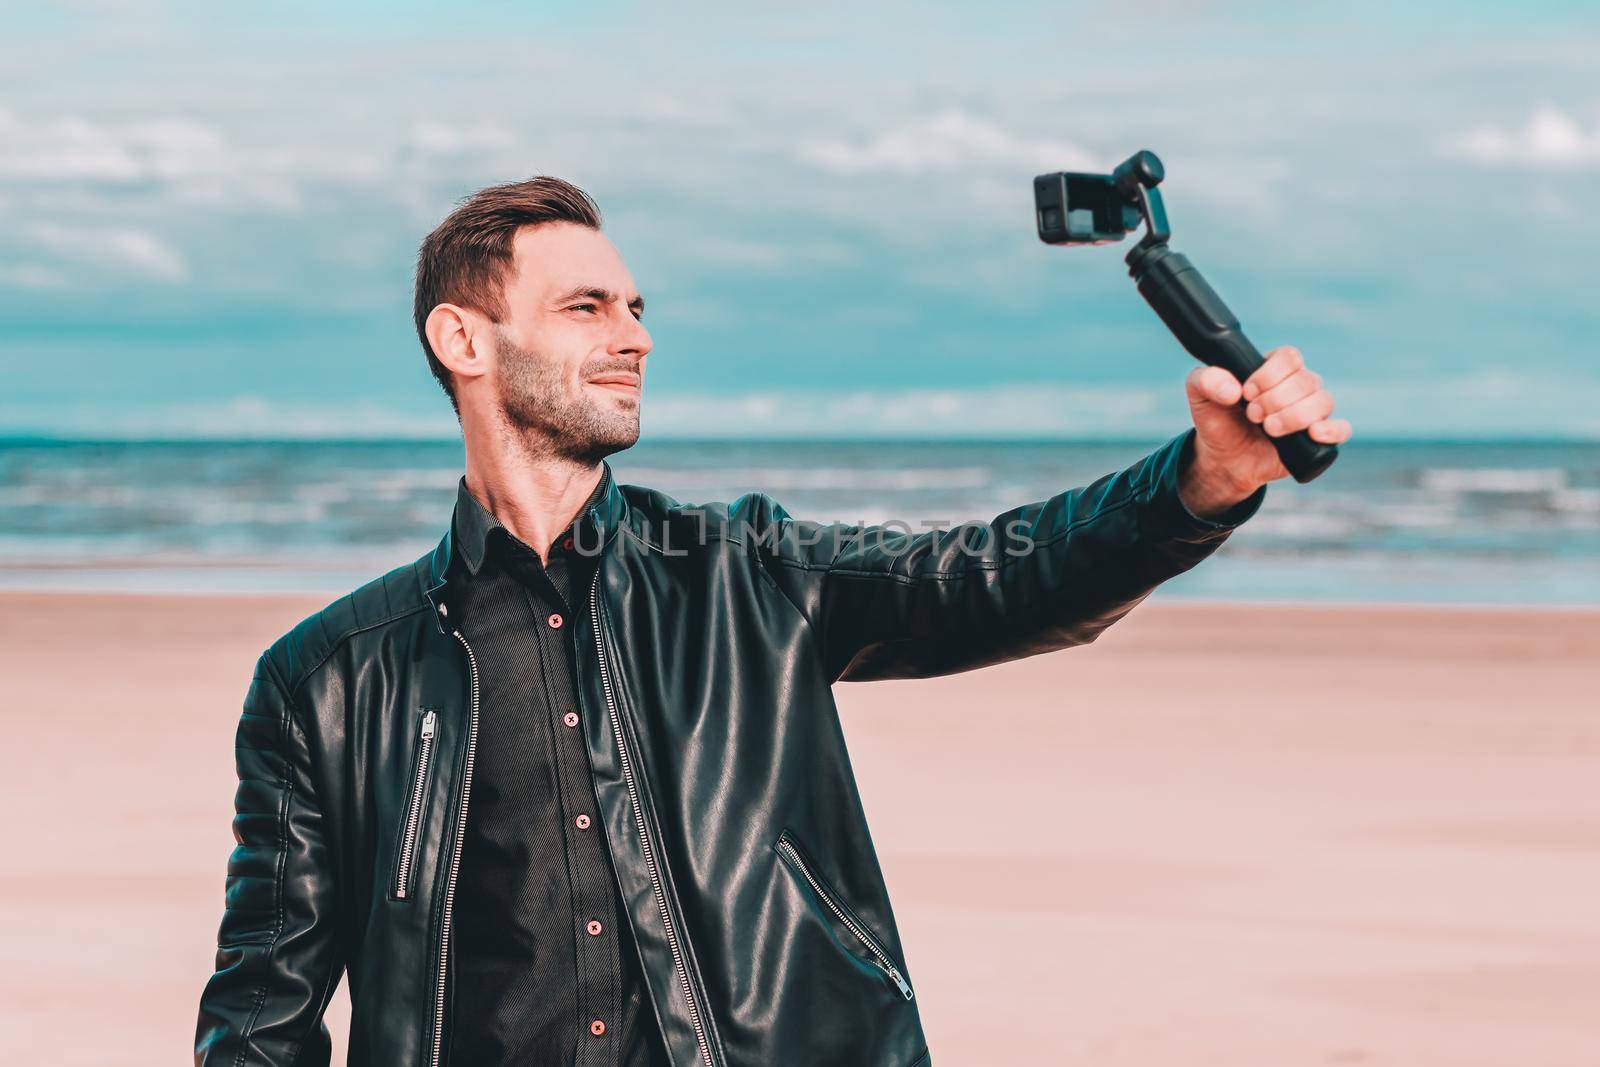 Youthful Blogger Making Selfie or Streaming Video at the Beach Using Action Camera with Gimbal Camera Stabilizer. Handsome Guy in Black Clothes Making Photo Against the Sea